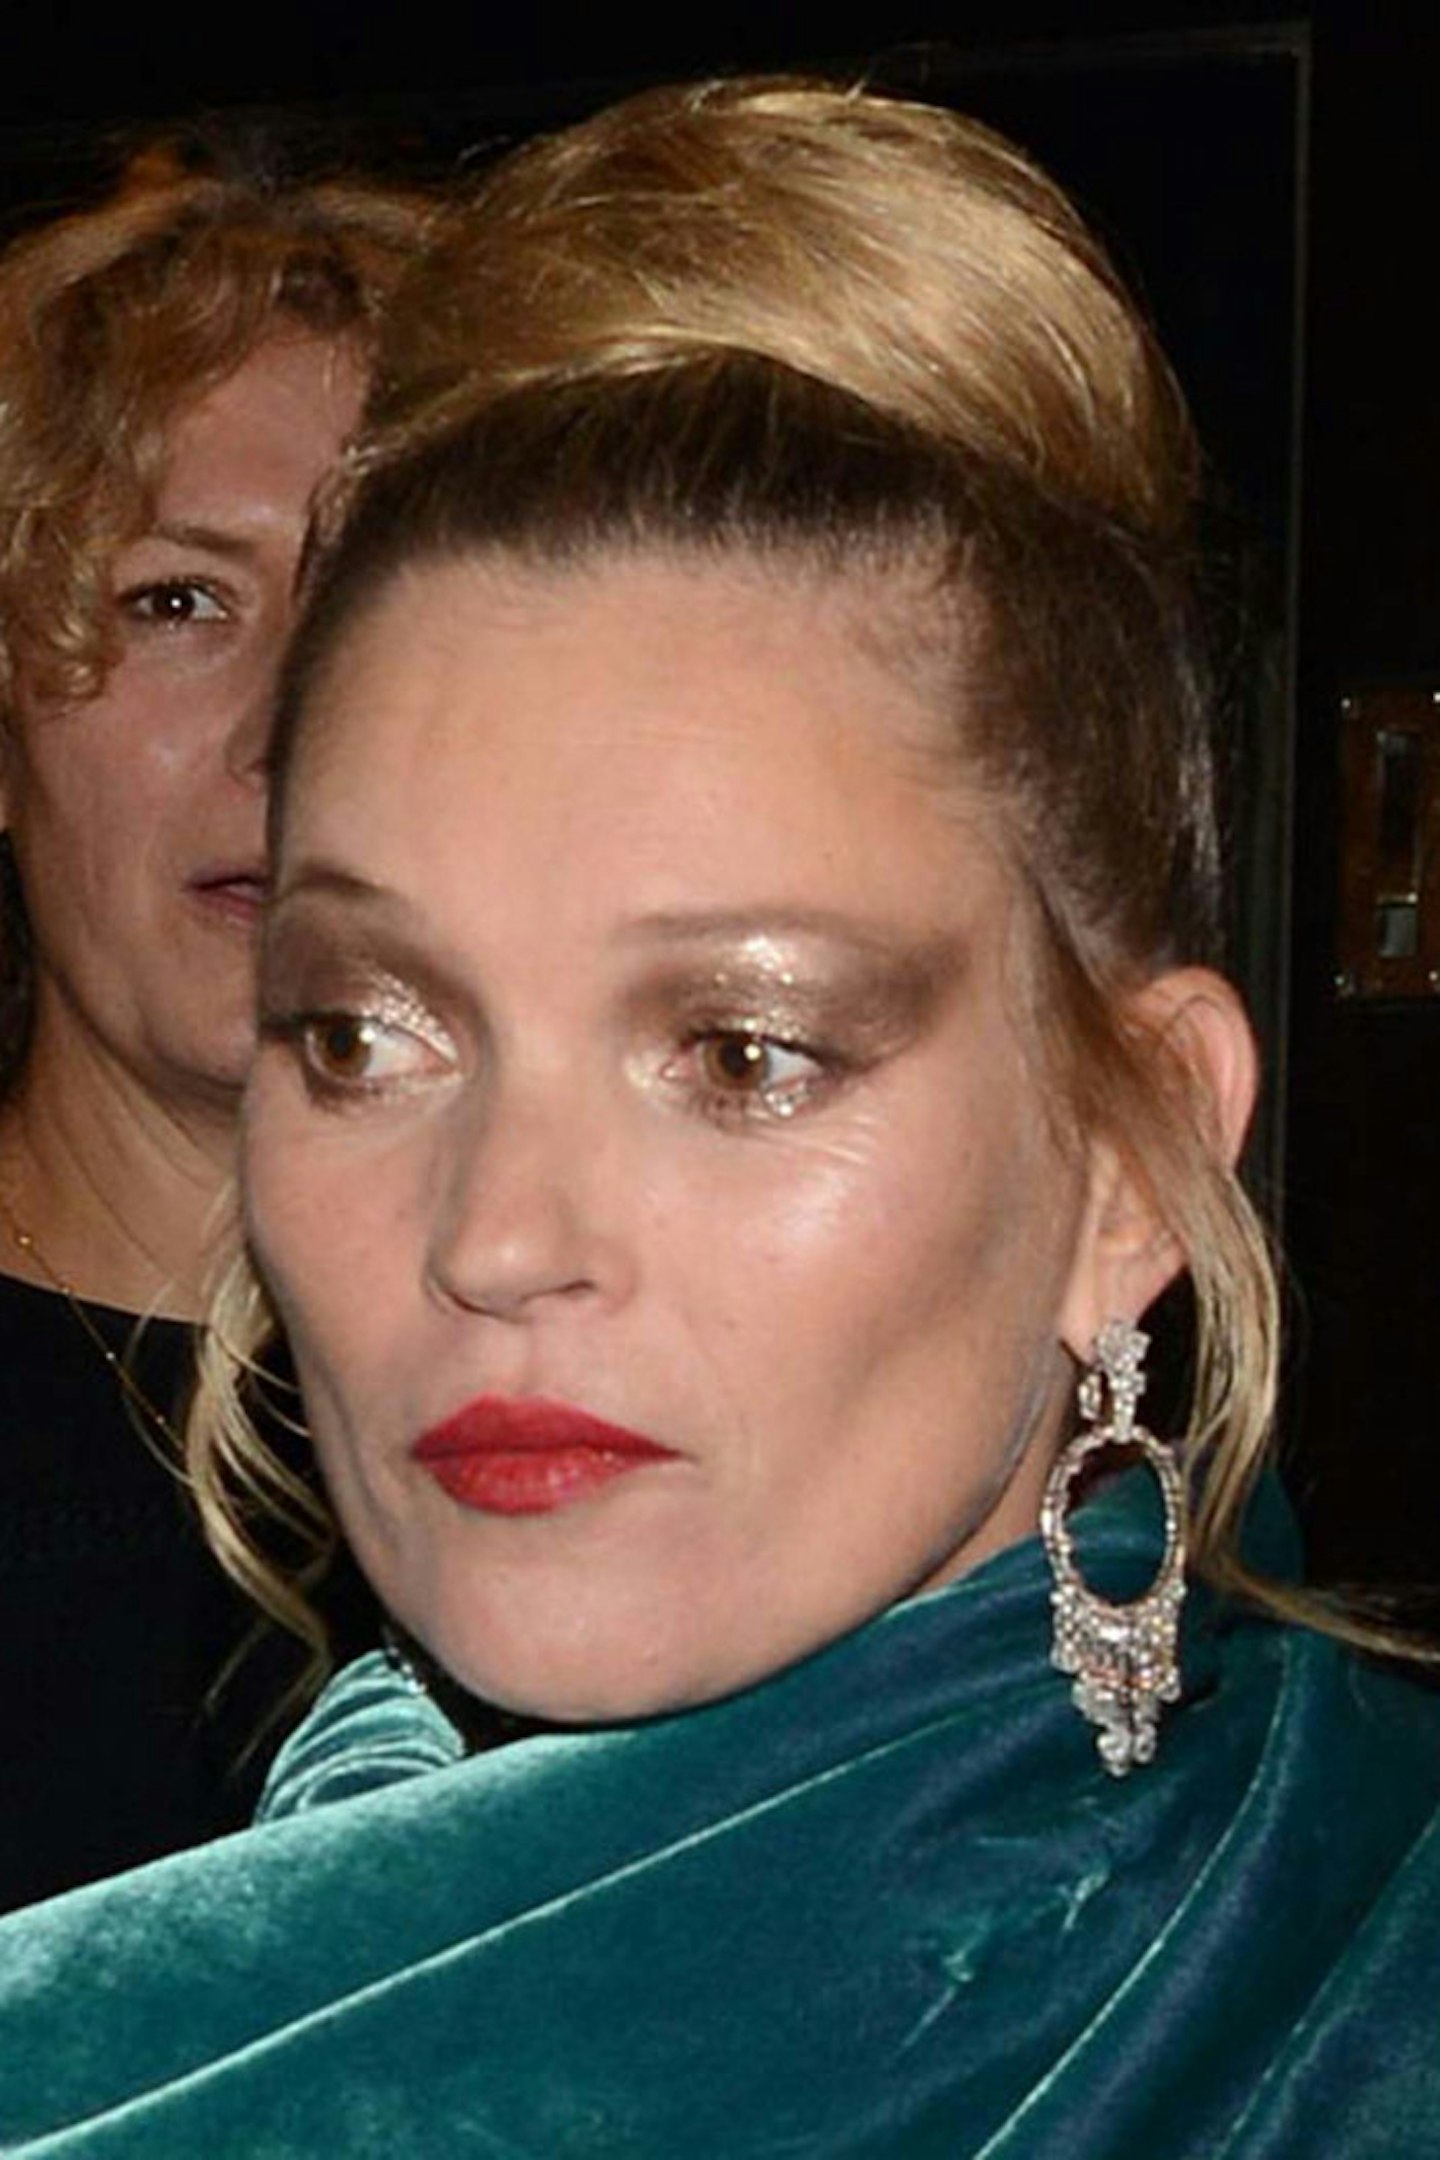 Get serious topknot inspiration from Kate Moss